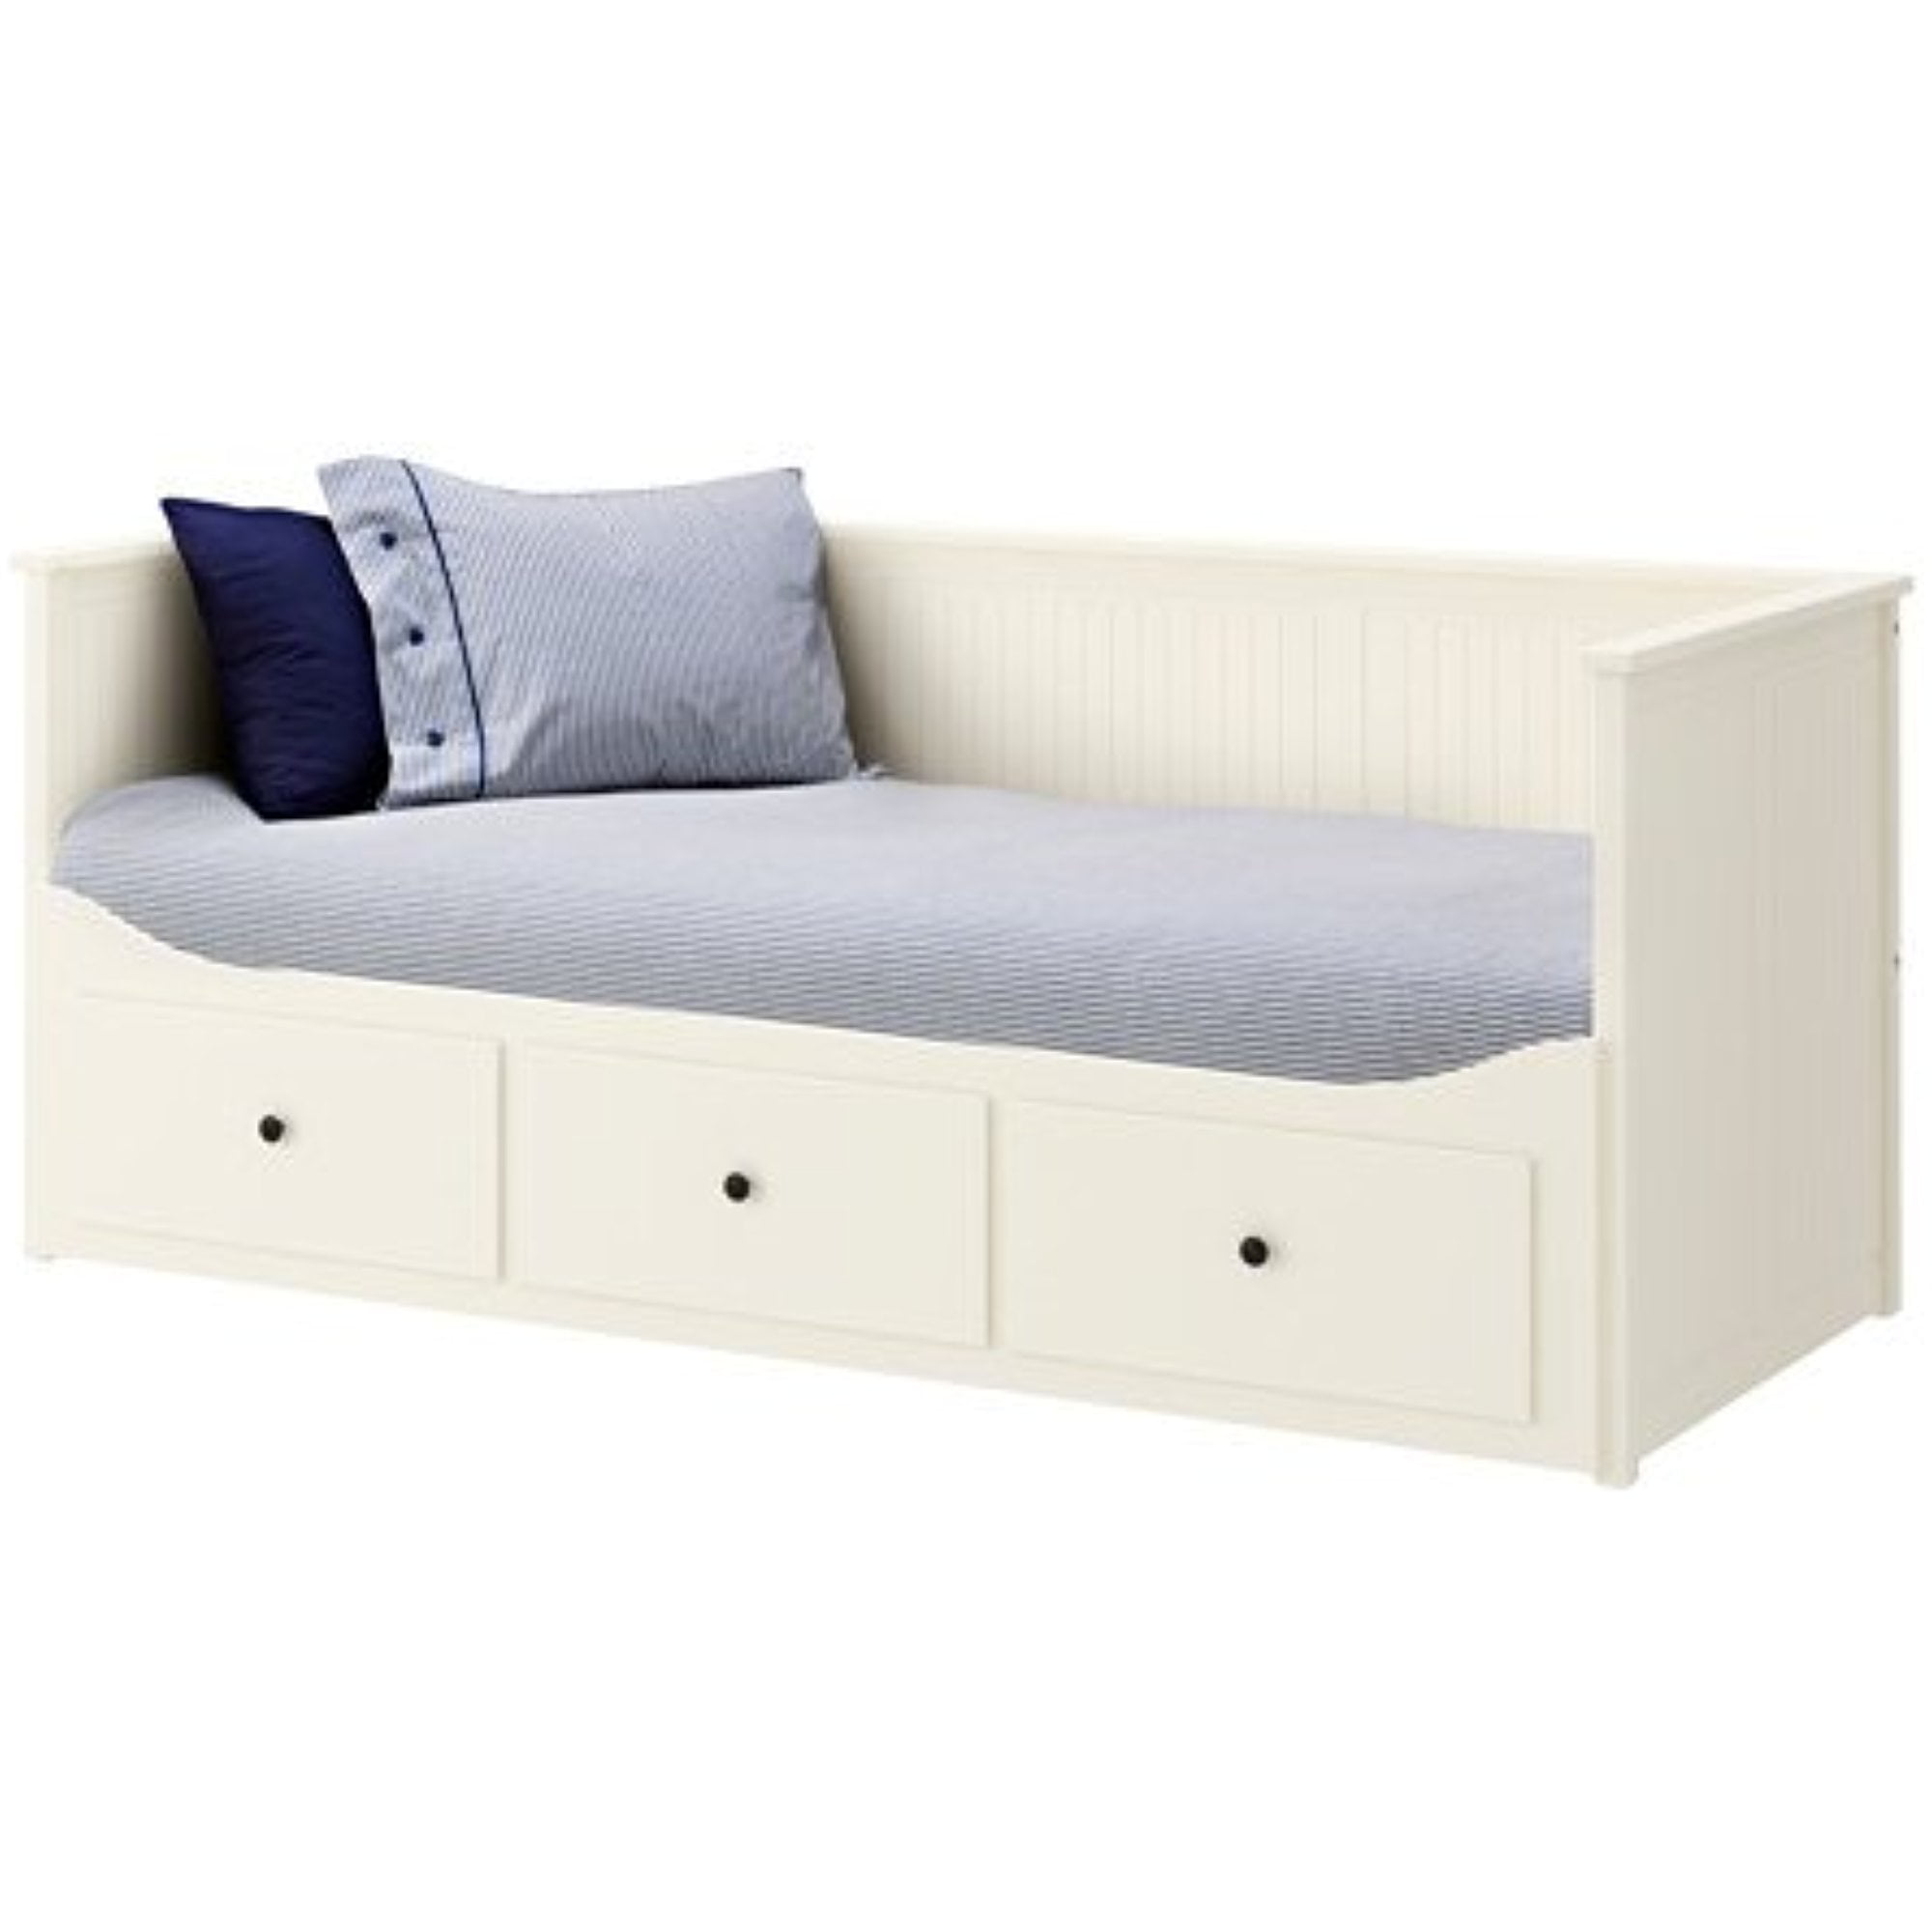 Ikea Twin Size Daybed With 3 Drawers 2 Mattresses White Meistervik Firm 22386 1122 164 Walmart Com Walmart Com,2 Bedroom Apartments For Rent In Kingston